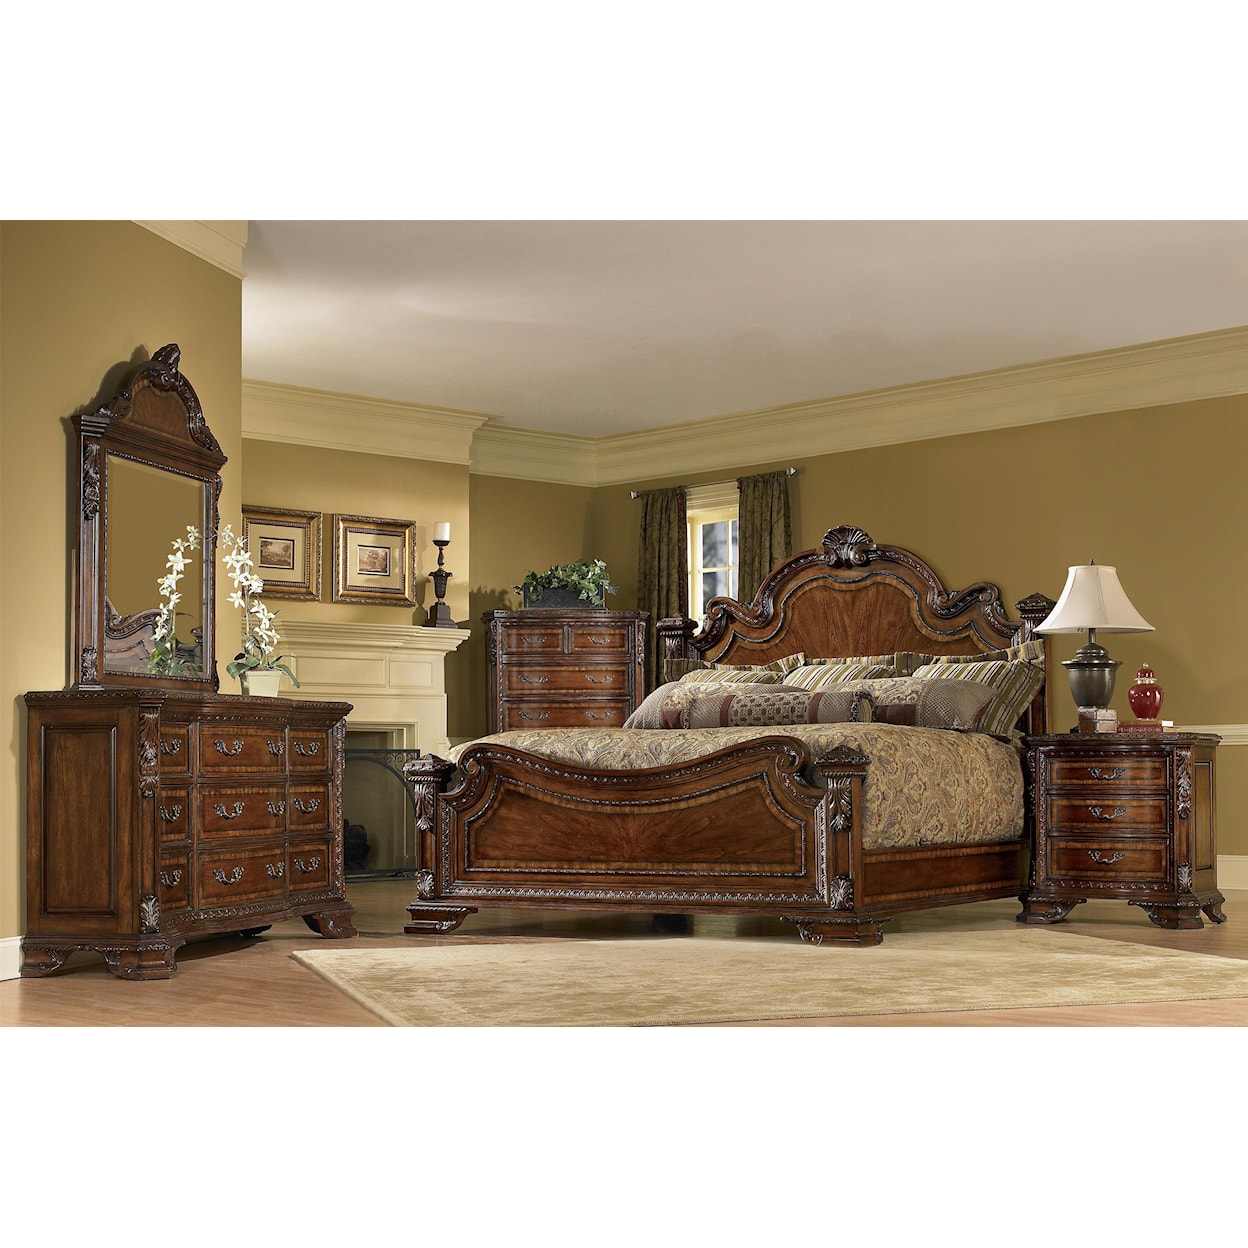 A.R.T. Furniture Inc Old World Queen Bedroom Group